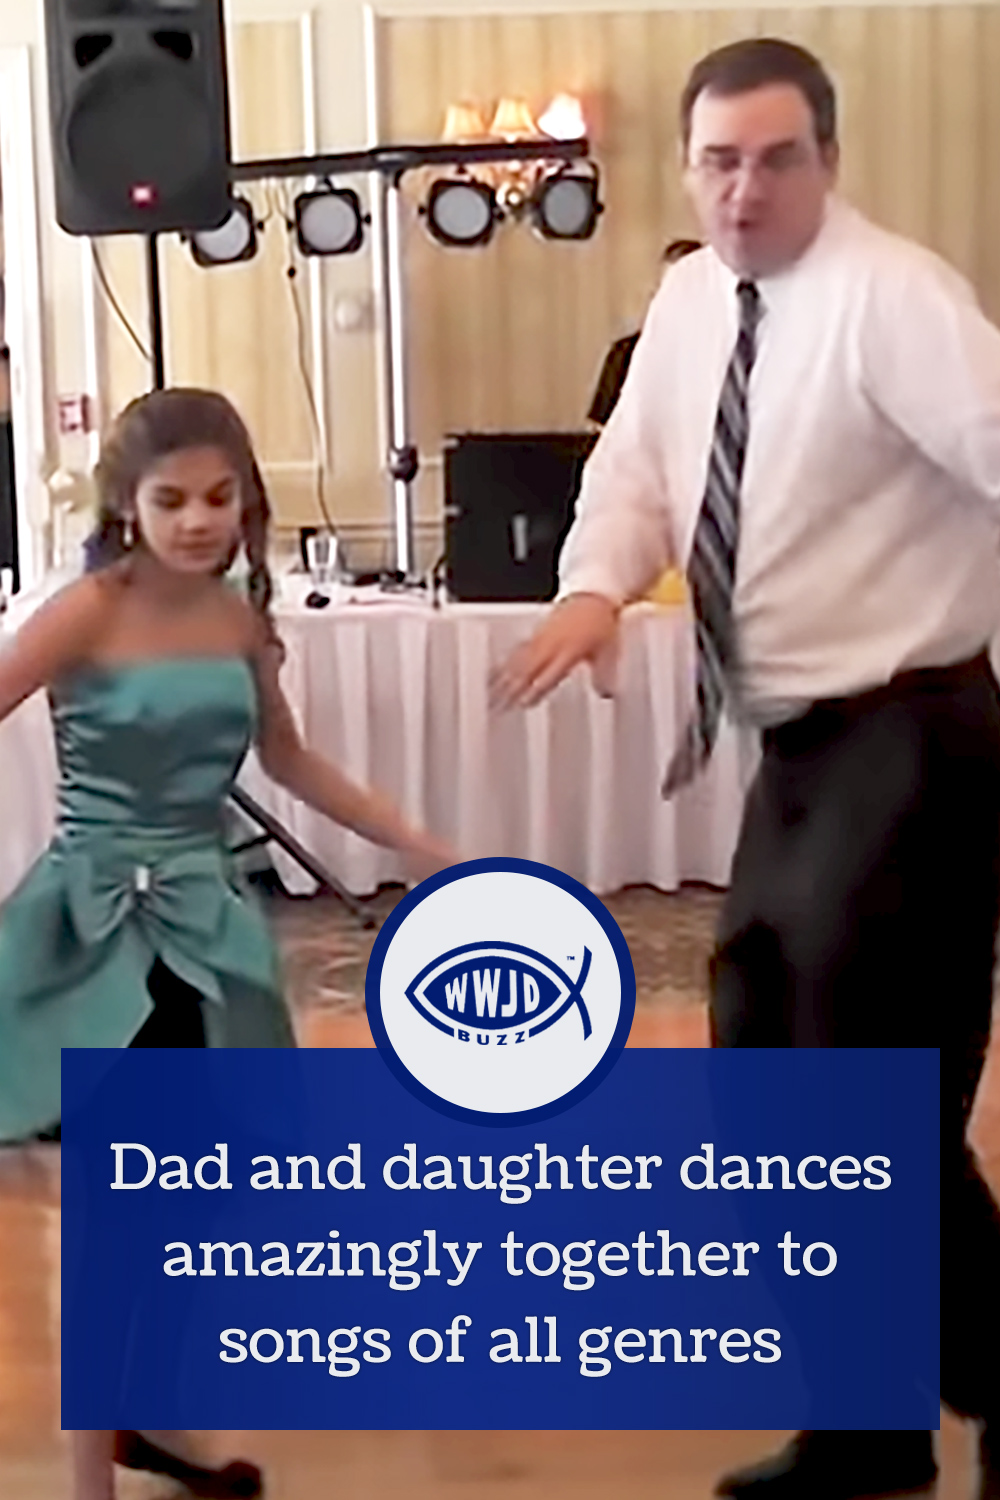 Dad and daughter dances amazingly together to songs of all genres